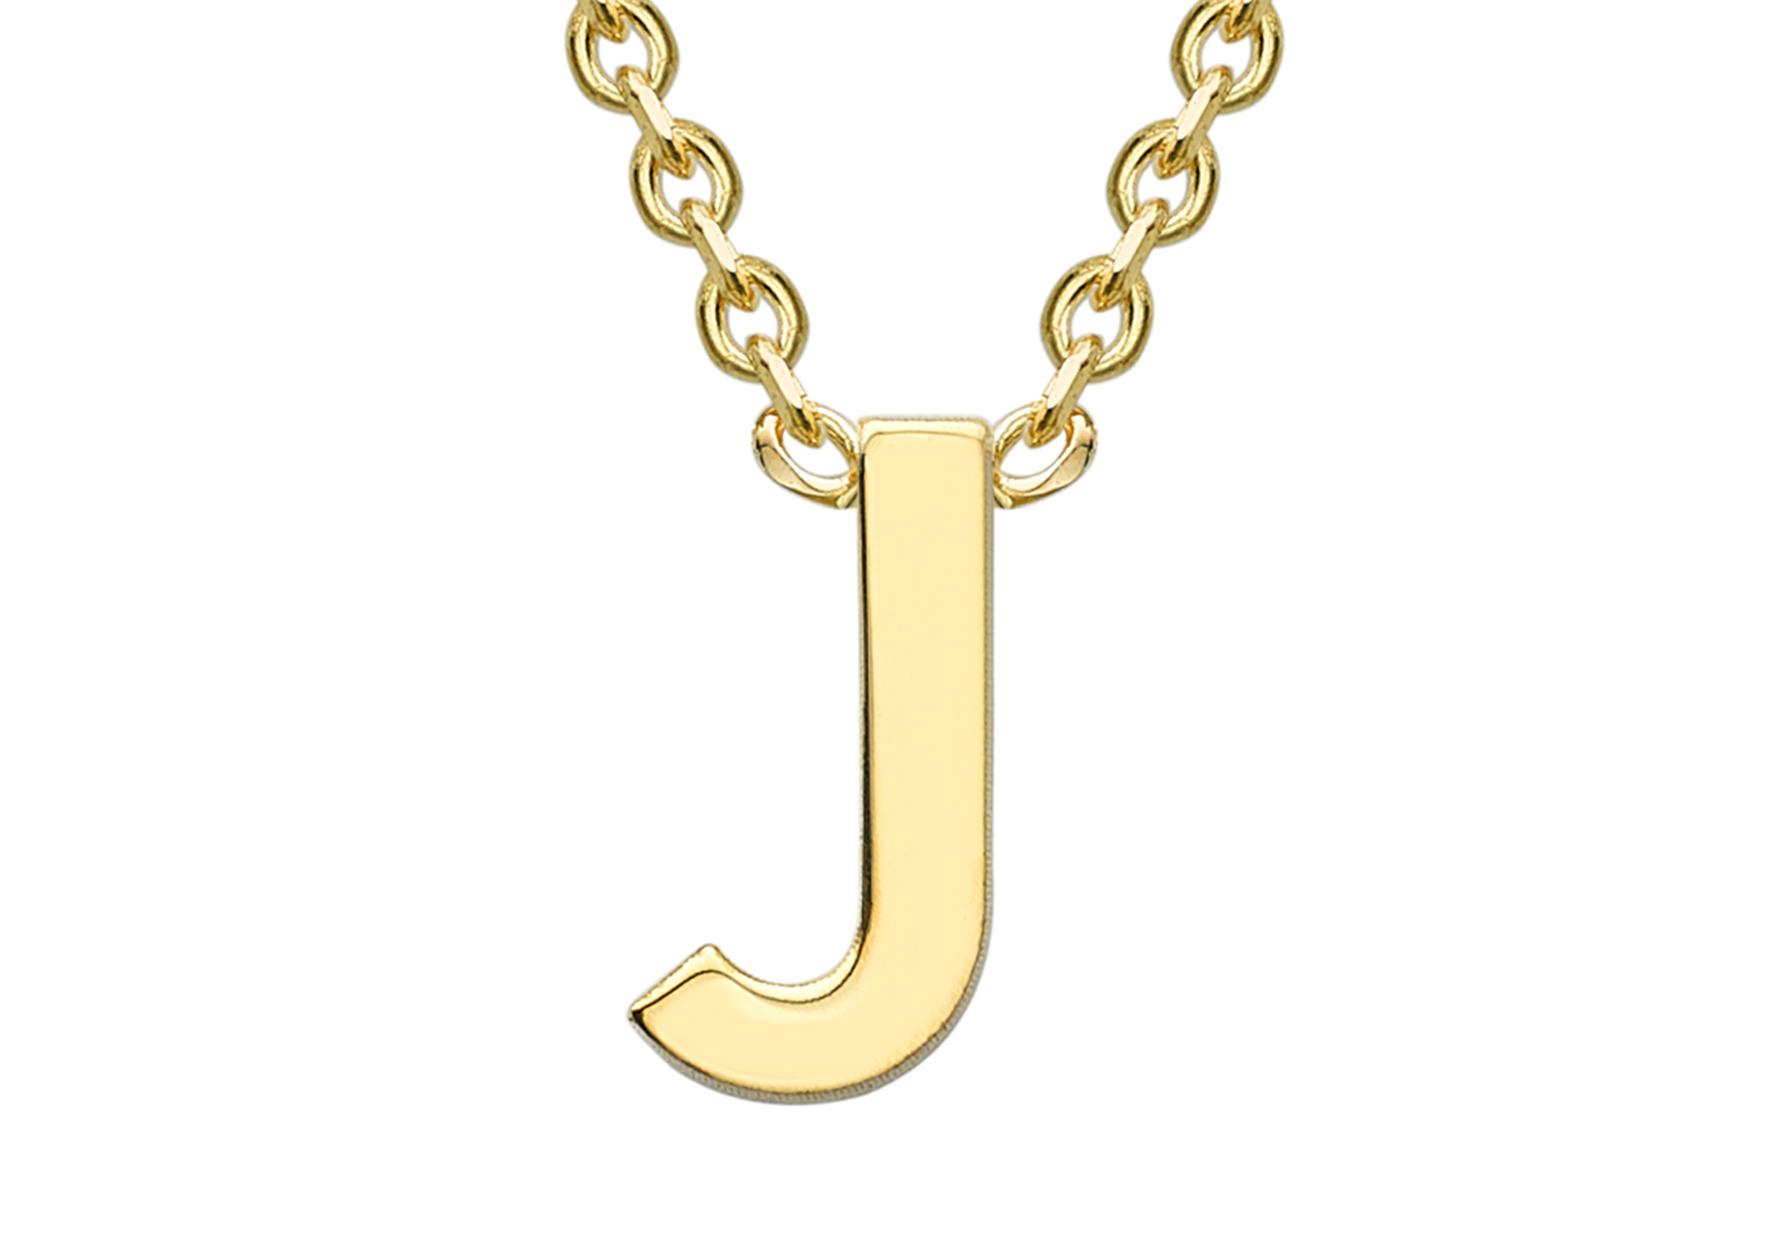 9ct-yellow-gold-petite-j-initial-necklace